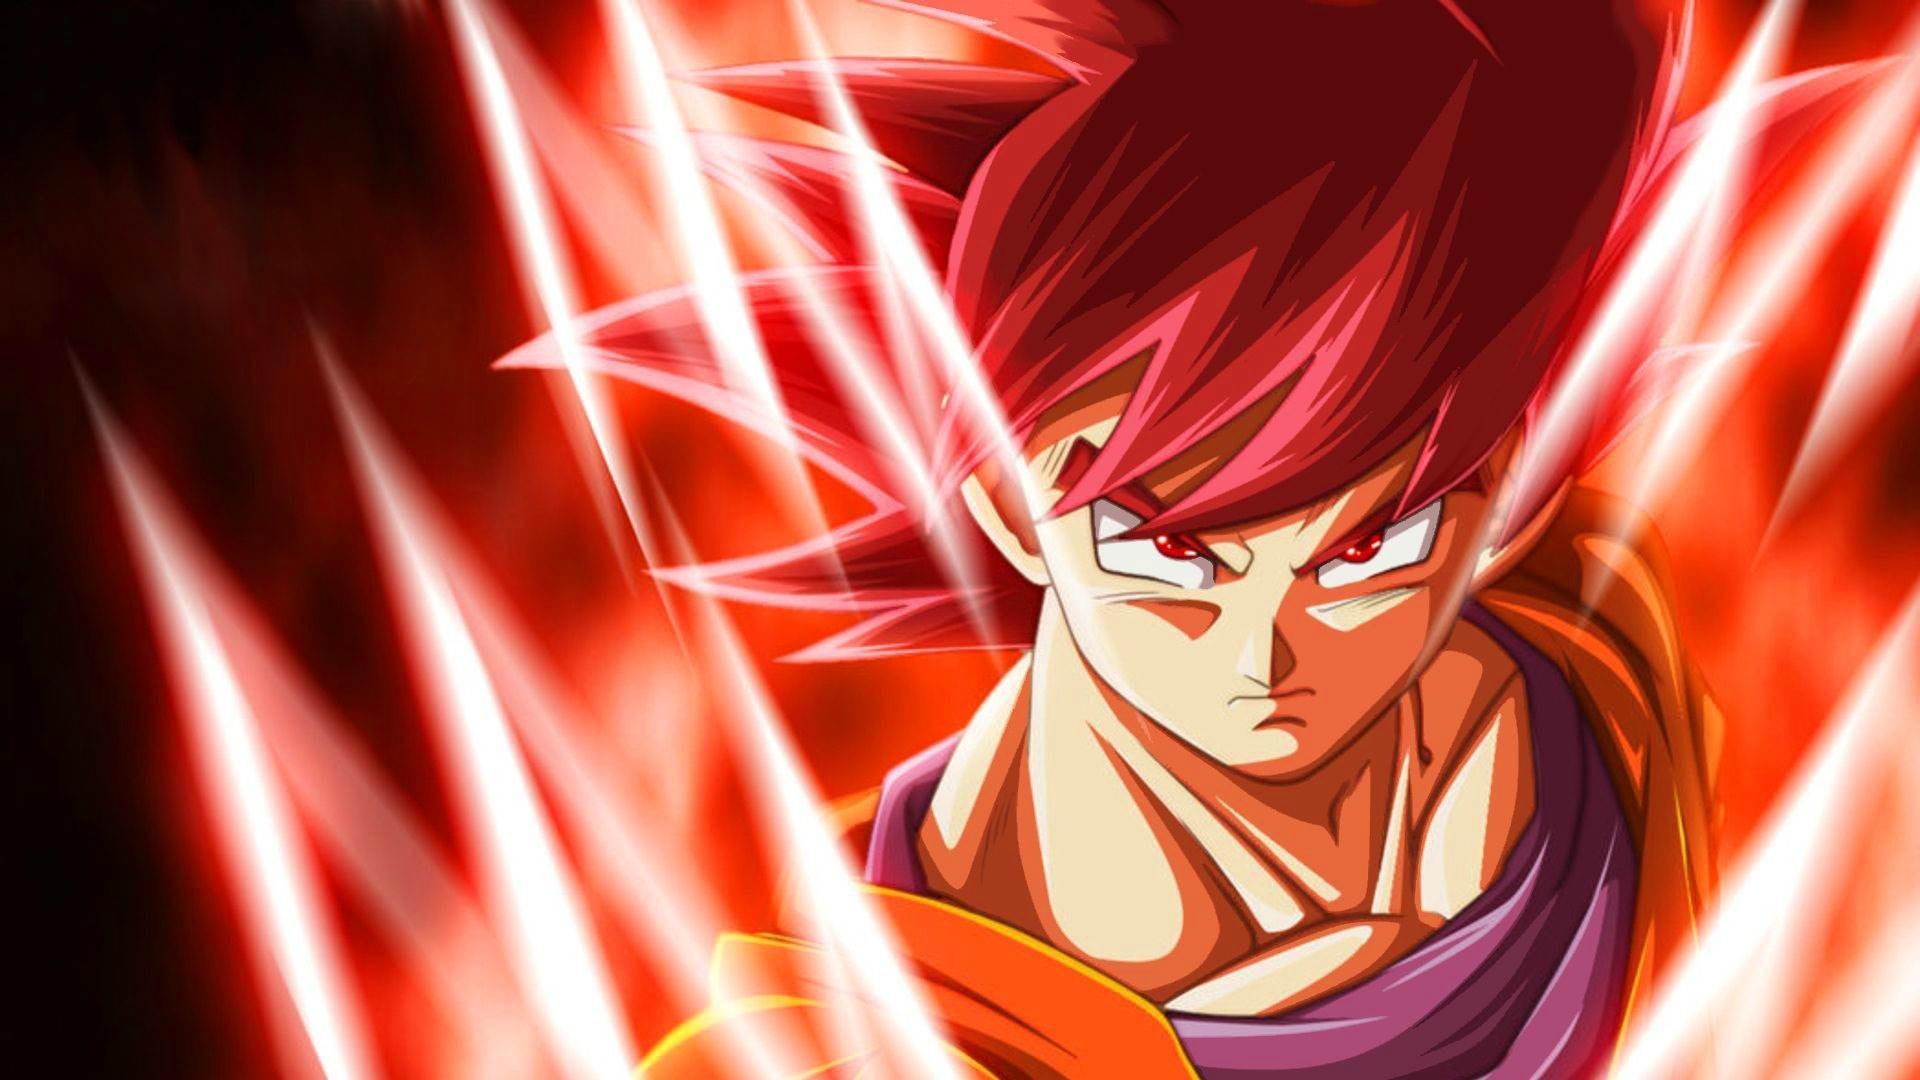 HD Wallpaper Goku Super Saiyan God with image resolution 1920x1080 pixel. You can make this wallpaper for your Desktop Computer Backgrounds, Mac Wallpapers, Android Lock screen or iPhone Screensavers